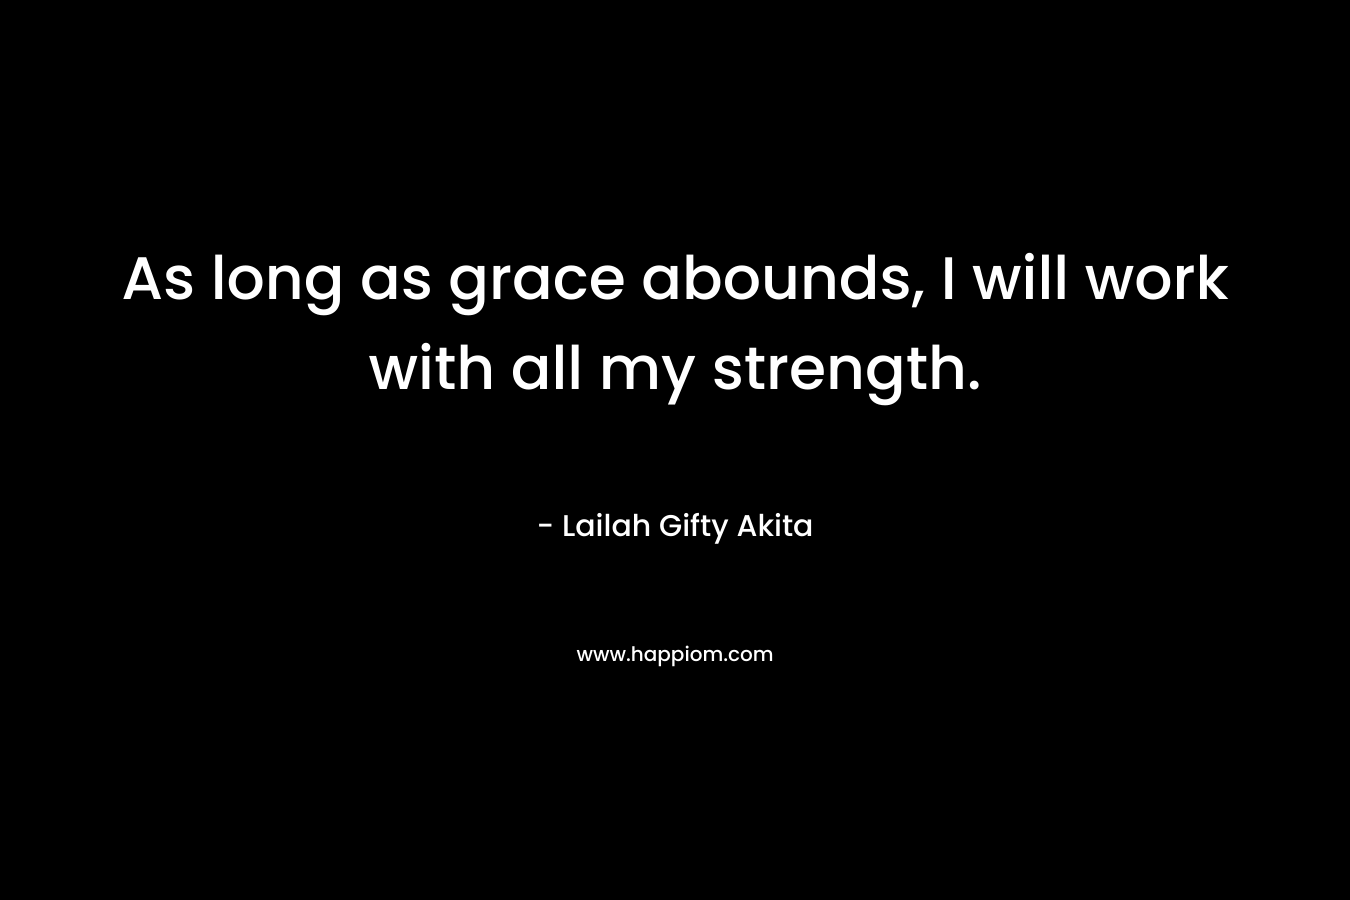 As long as grace abounds, I will work with all my strength.